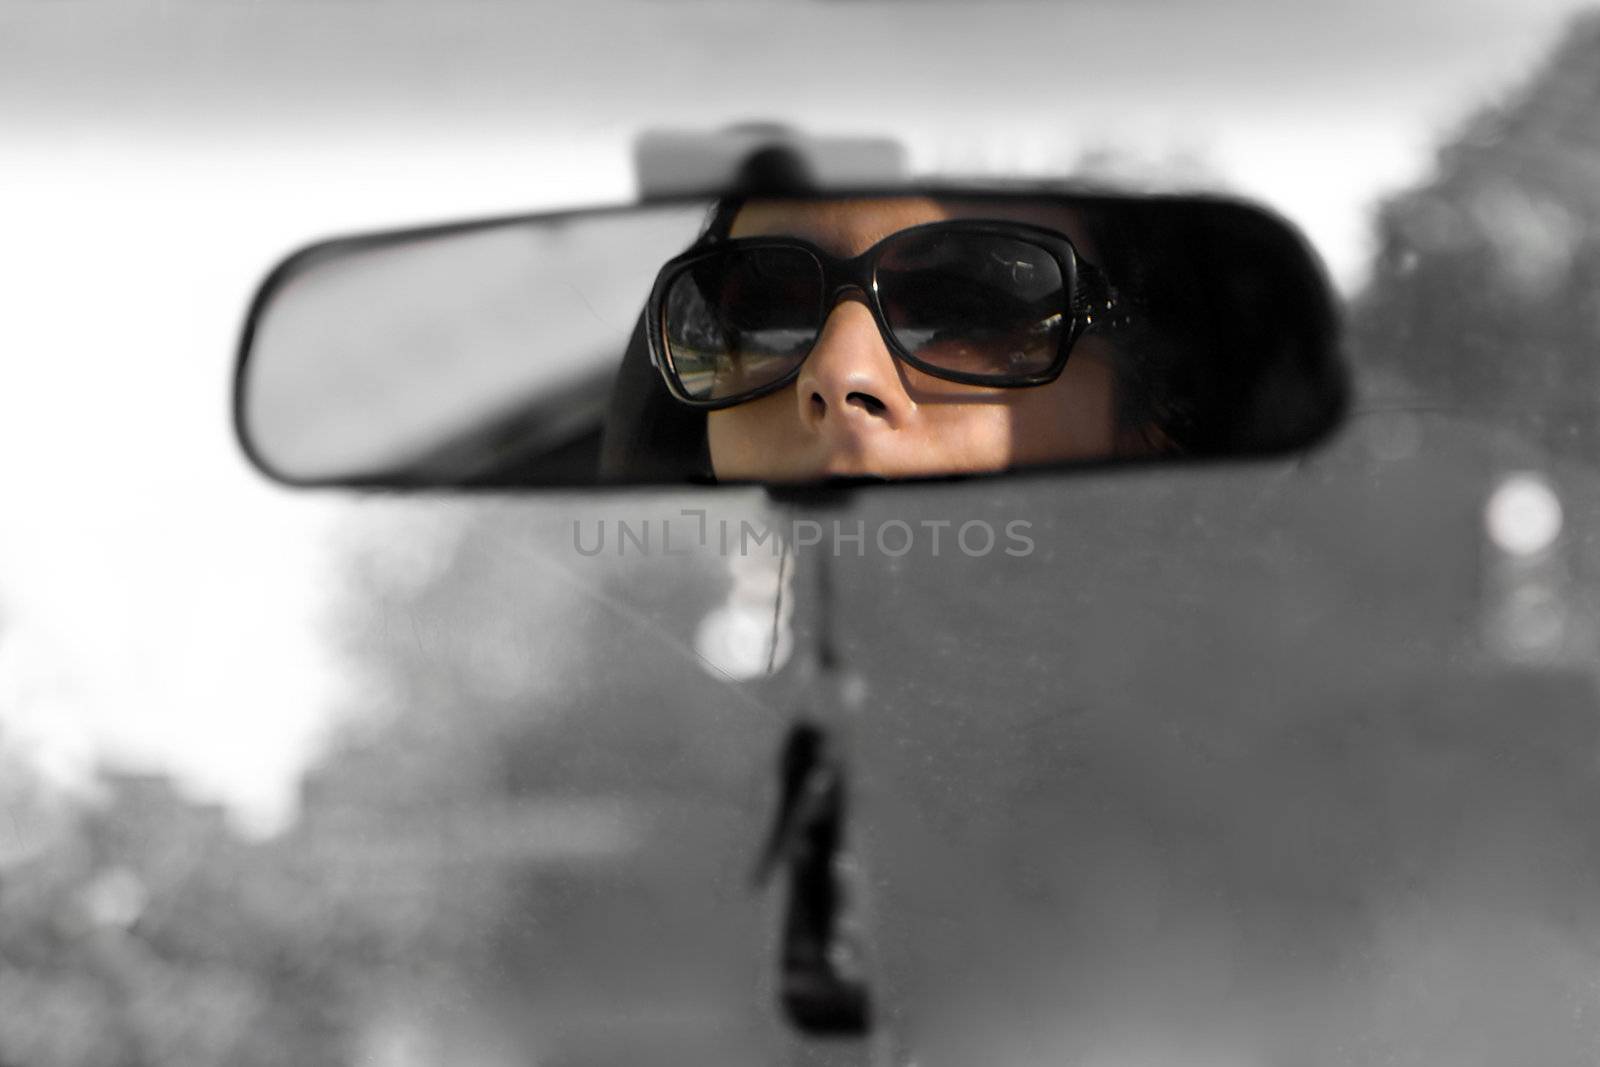 The face of a young woman driving as seen in the rear view mirror in isolated color.